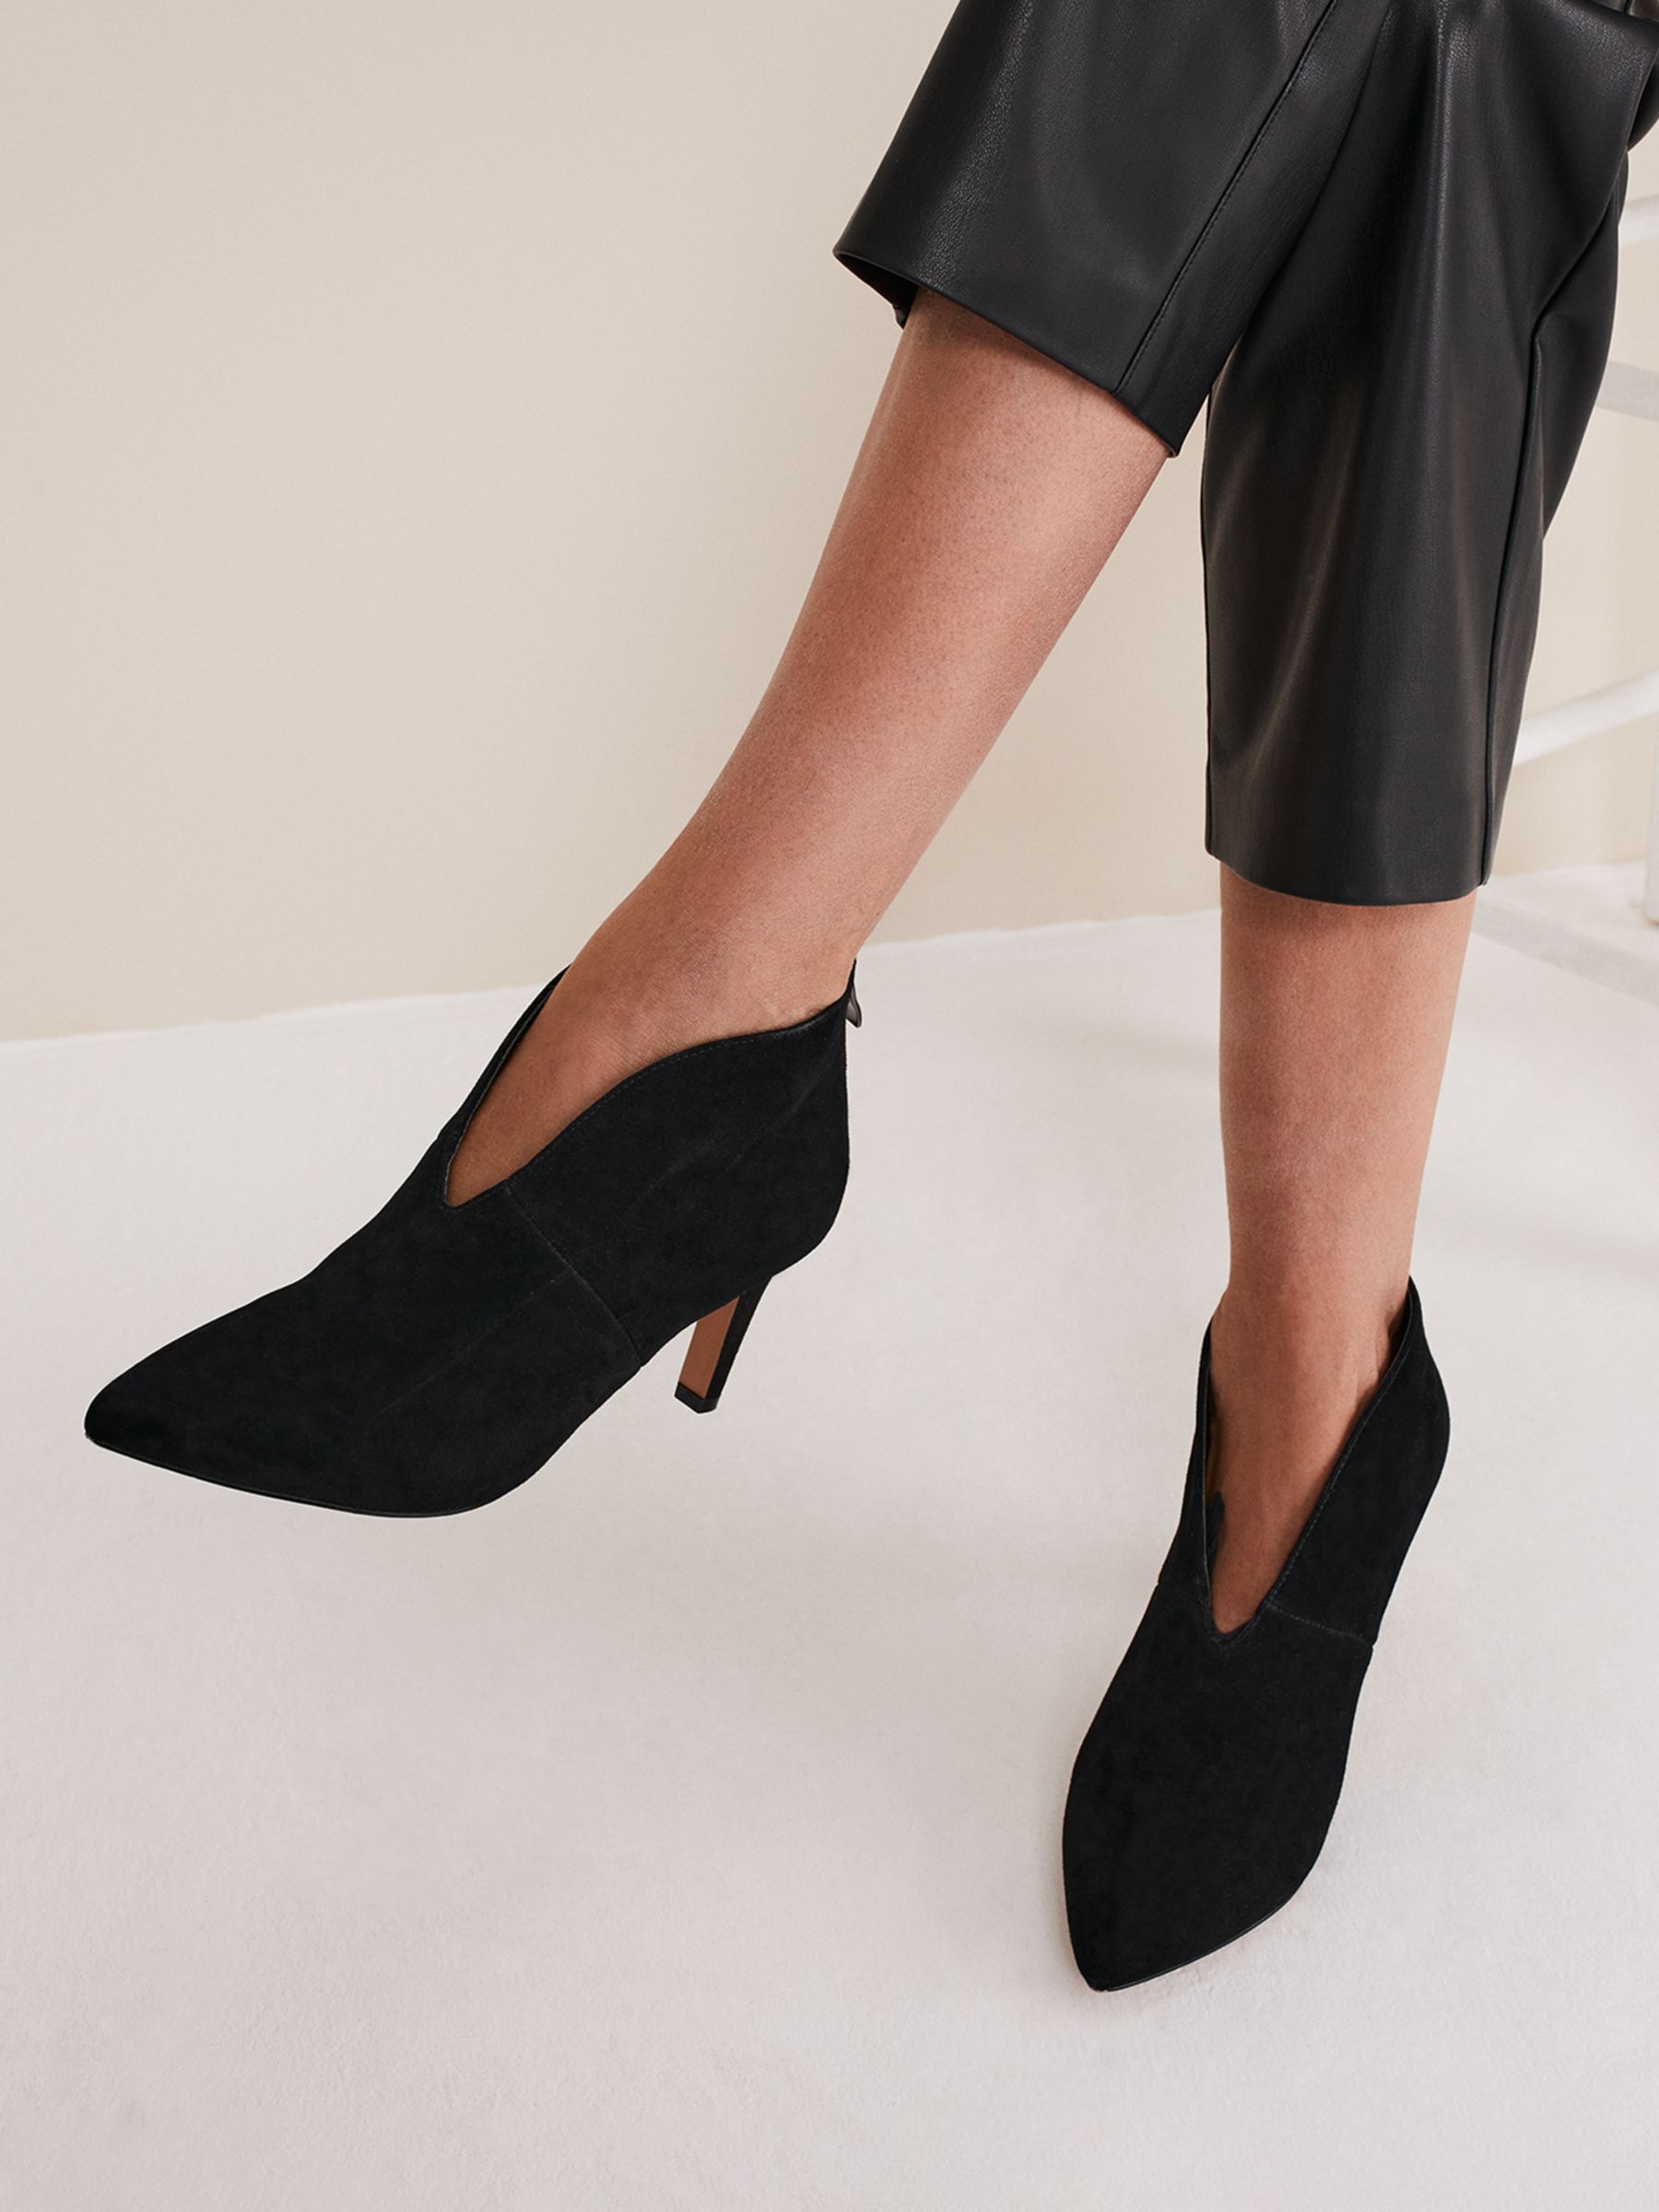 Phase Eight Cut Out Leather Shoe Boots, Black at John Lewis & Partners